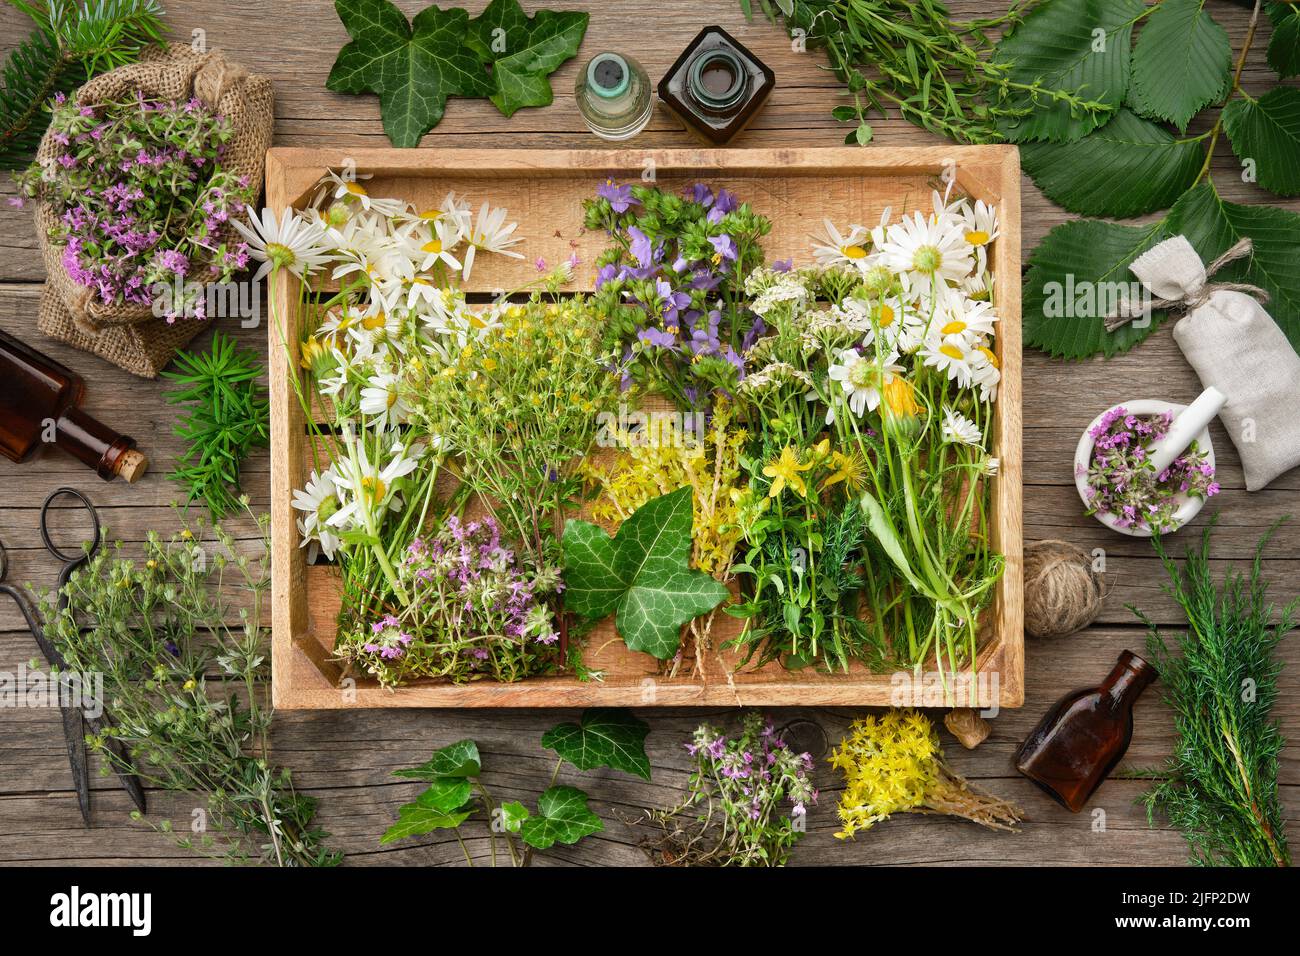 Wooden crate filled with  bunches of medicinal herbs, dry healthy plants and flowers. Alternative herbal medicine. Top view. Flat lay. Stock Photo